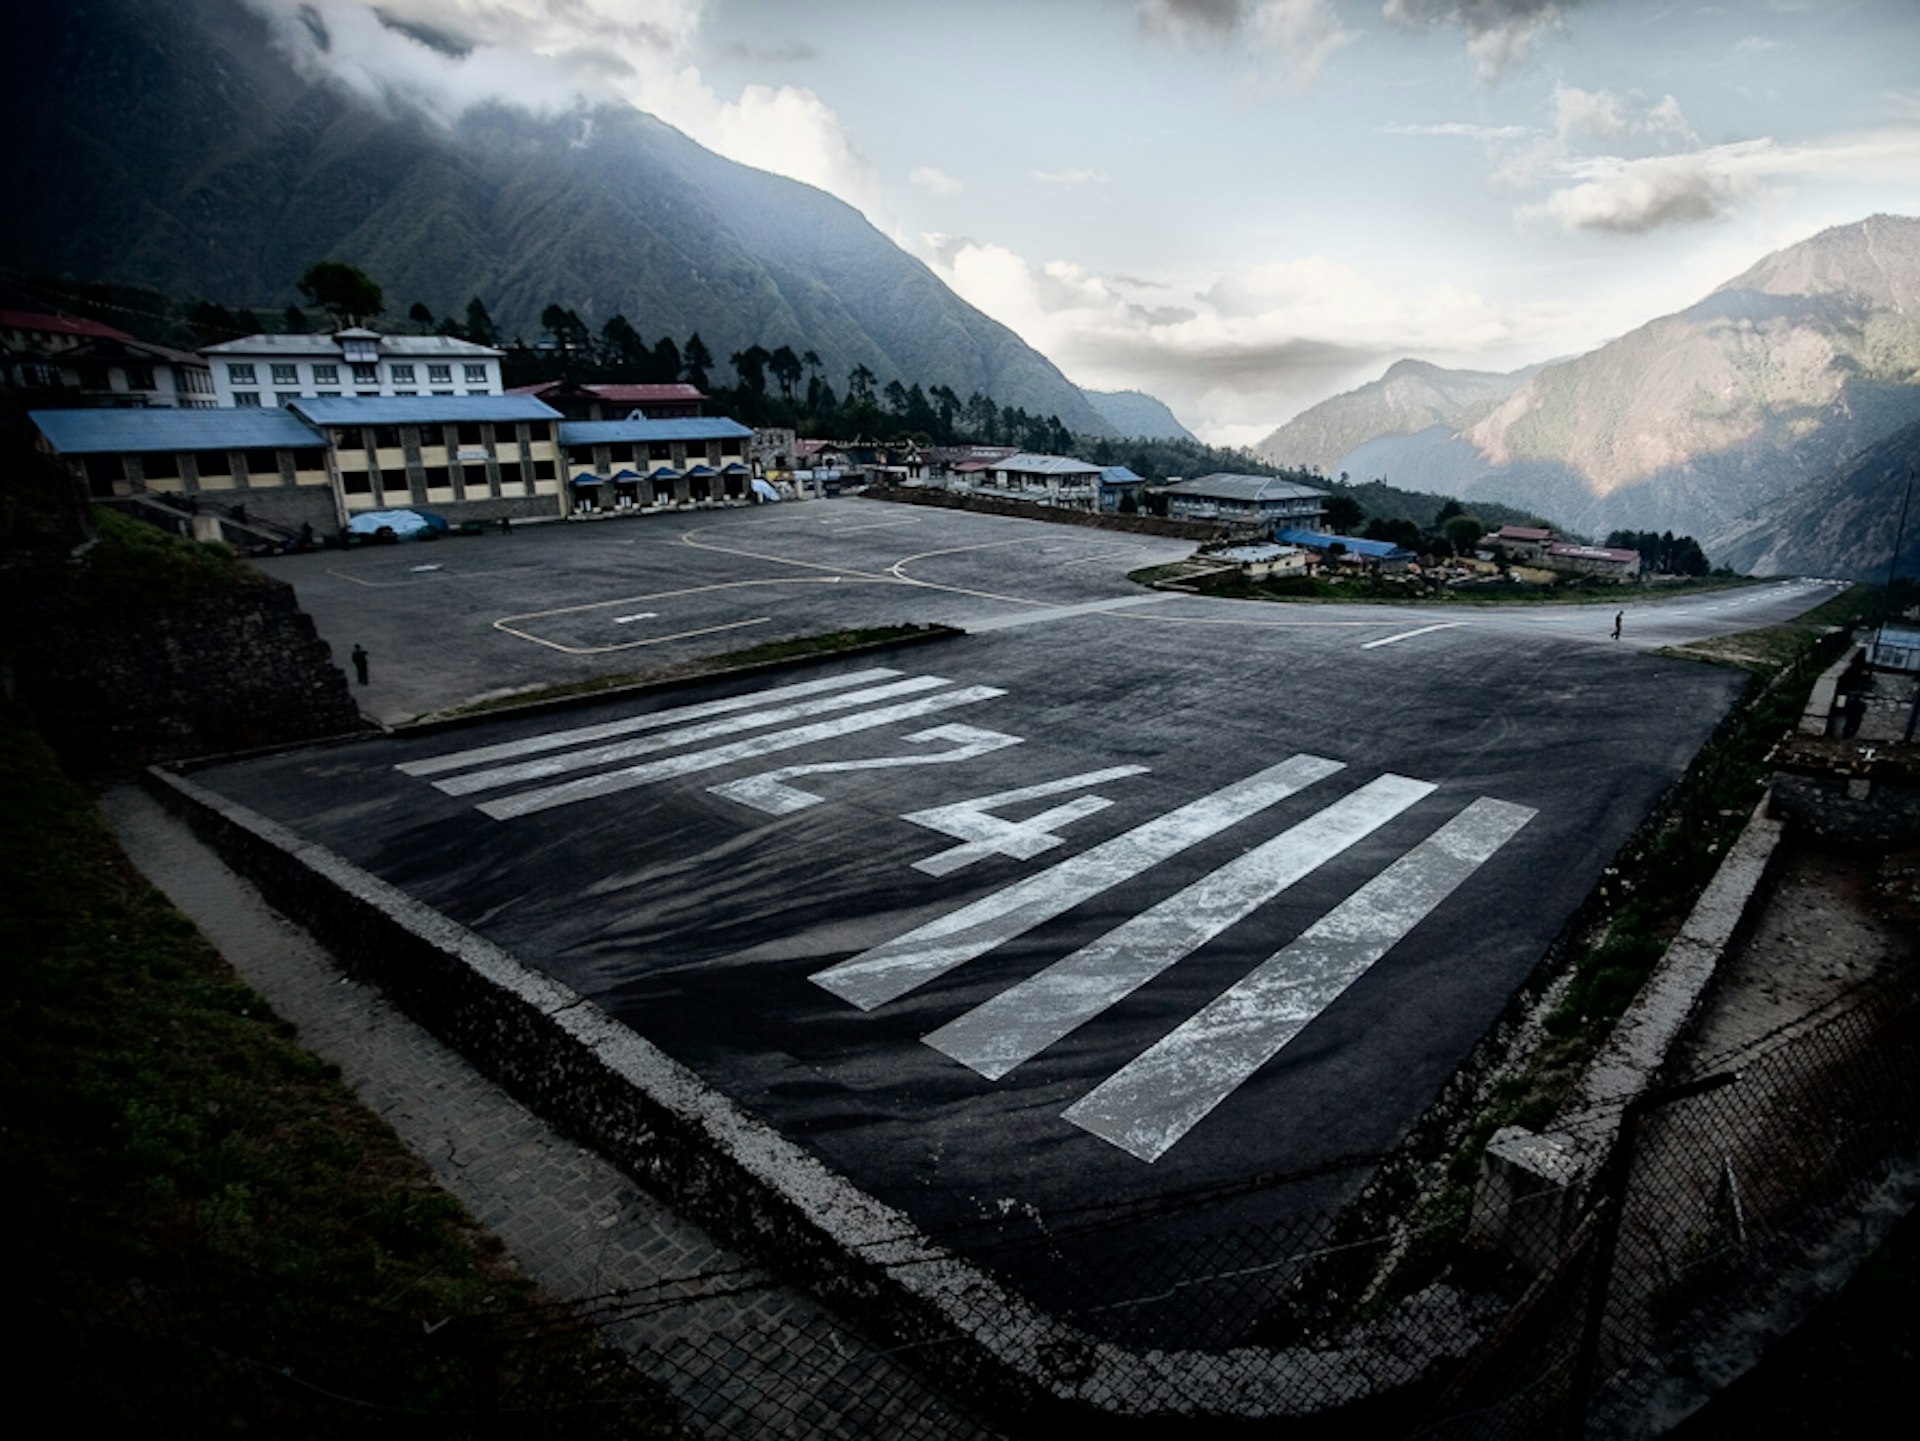 Mountain airstrip at Lukla, start of the Everest Base Camp trek. Image by Chris Marquardt / CC by SA 2.0